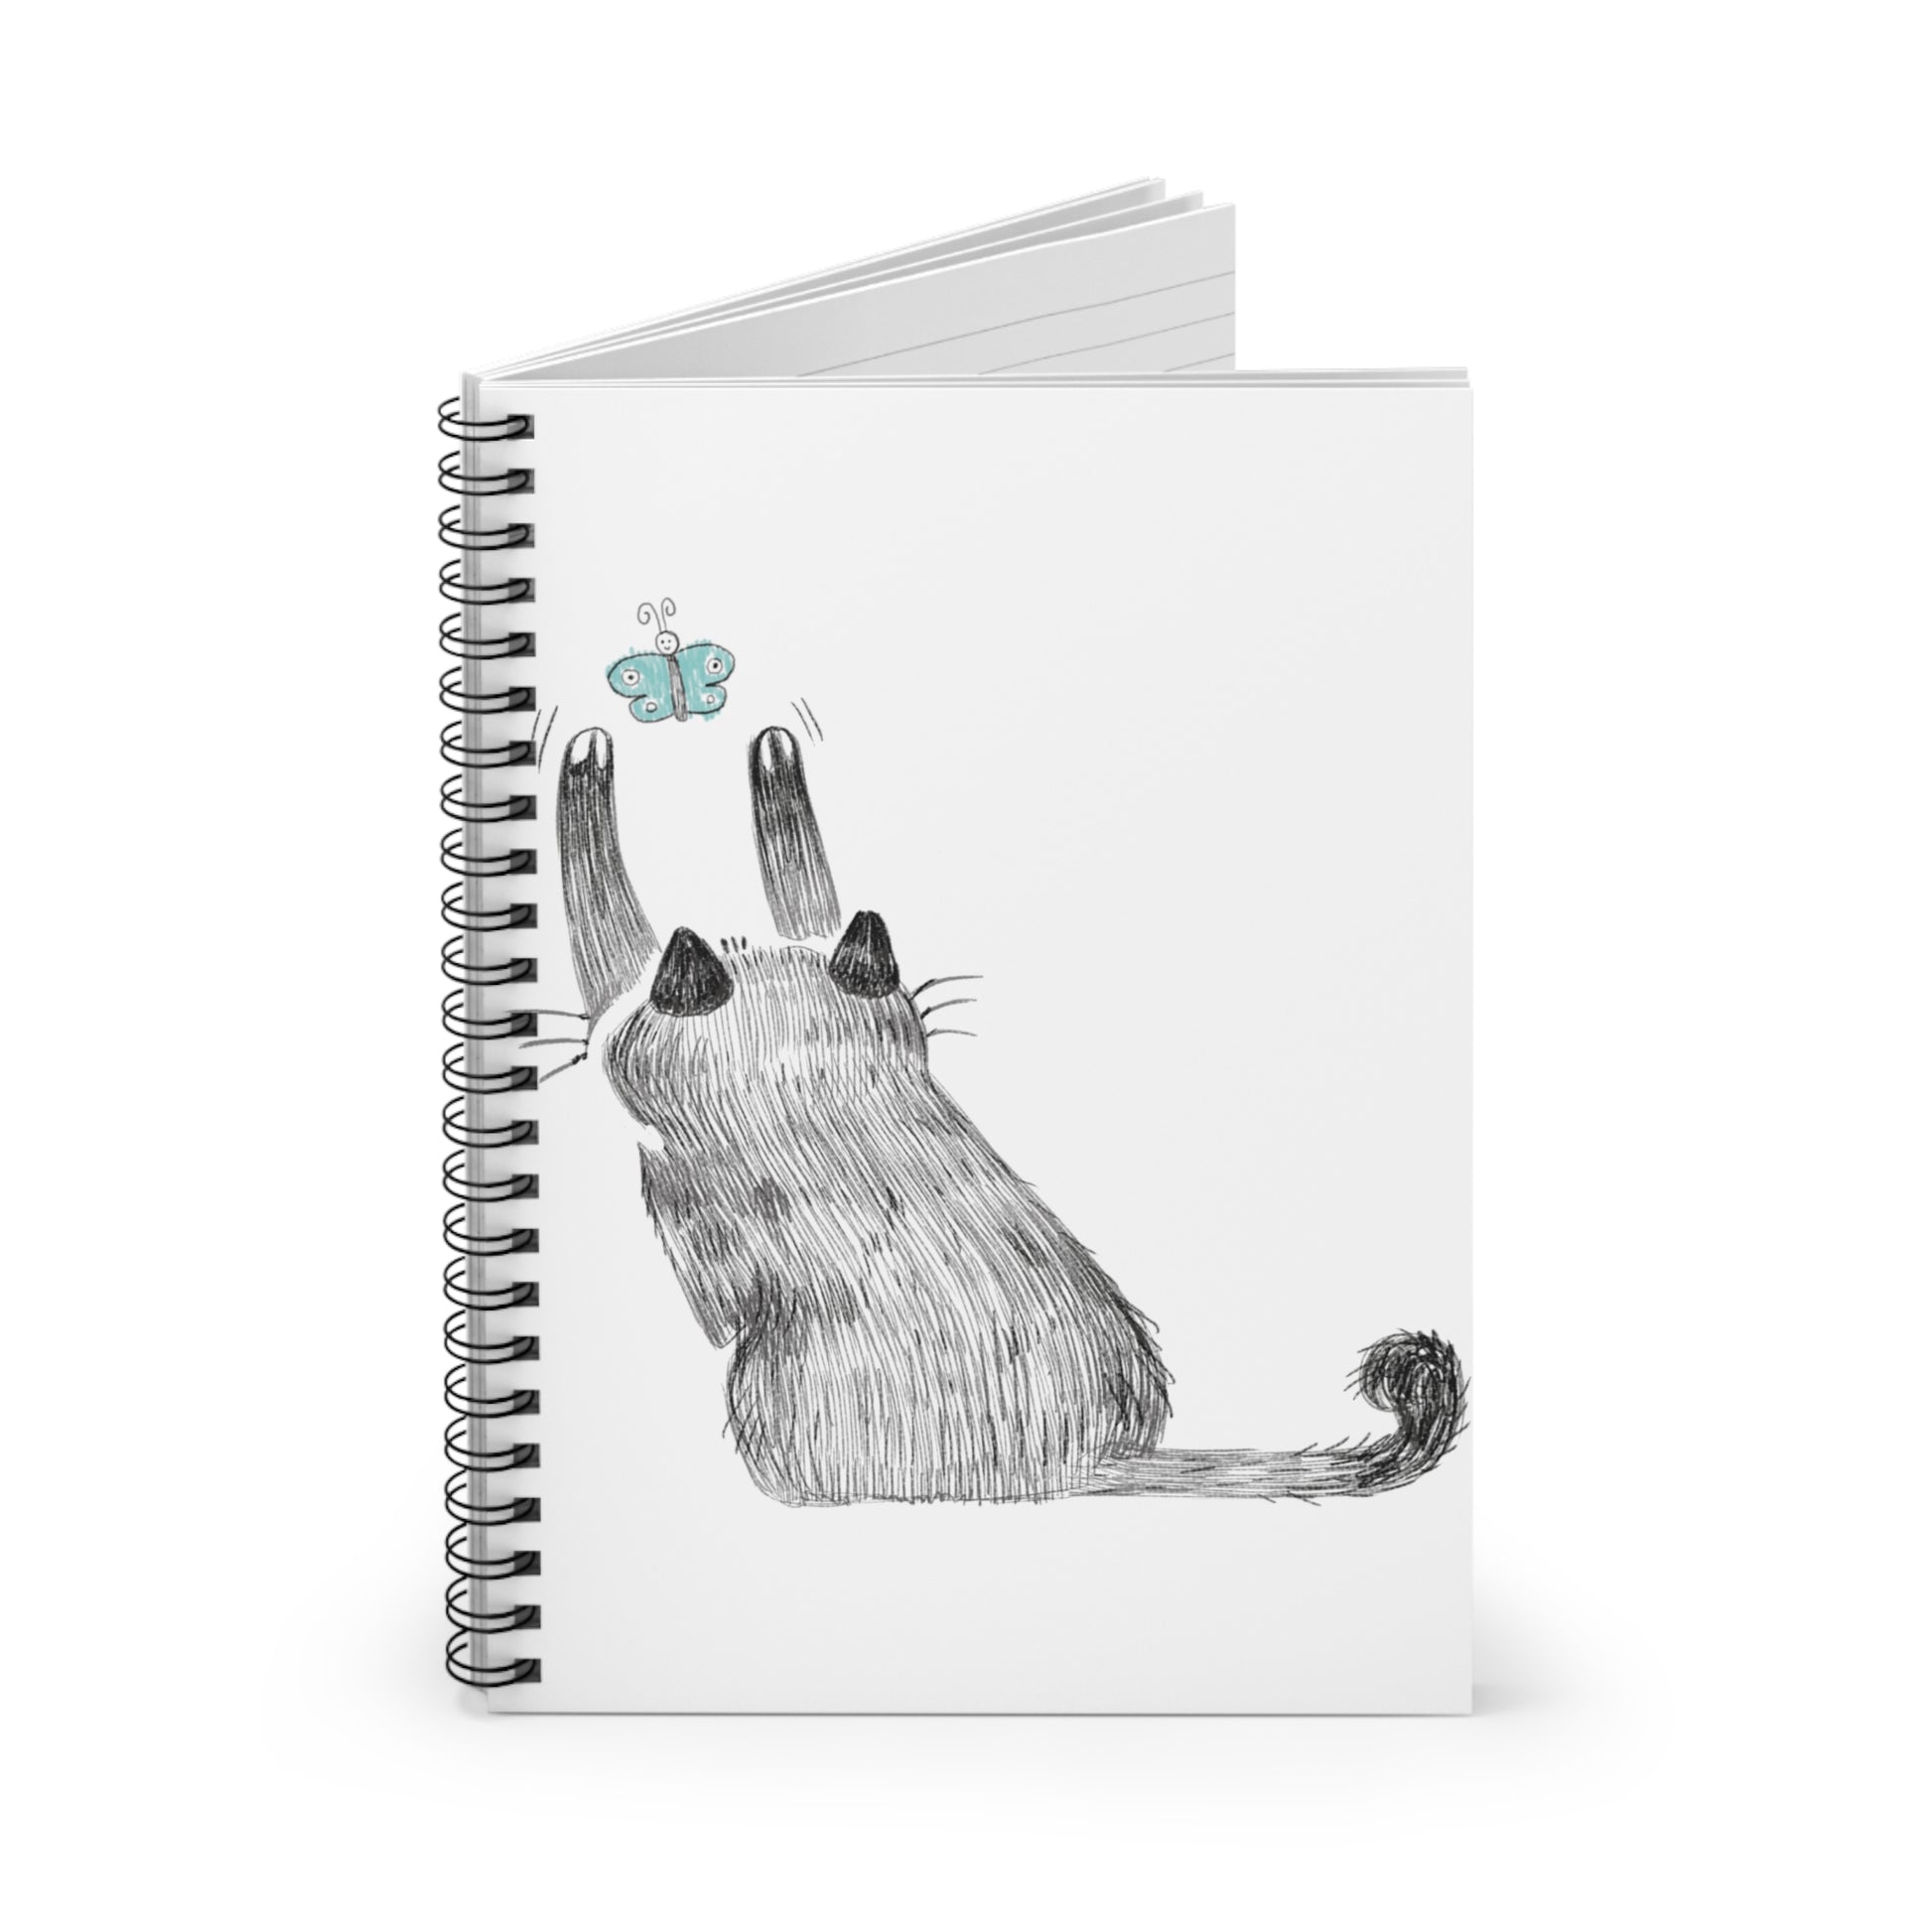 I'll Miss You: Spiral Notebook - Log Books - Journals - Diaries - and More Custom Printed by TheGlassyLass